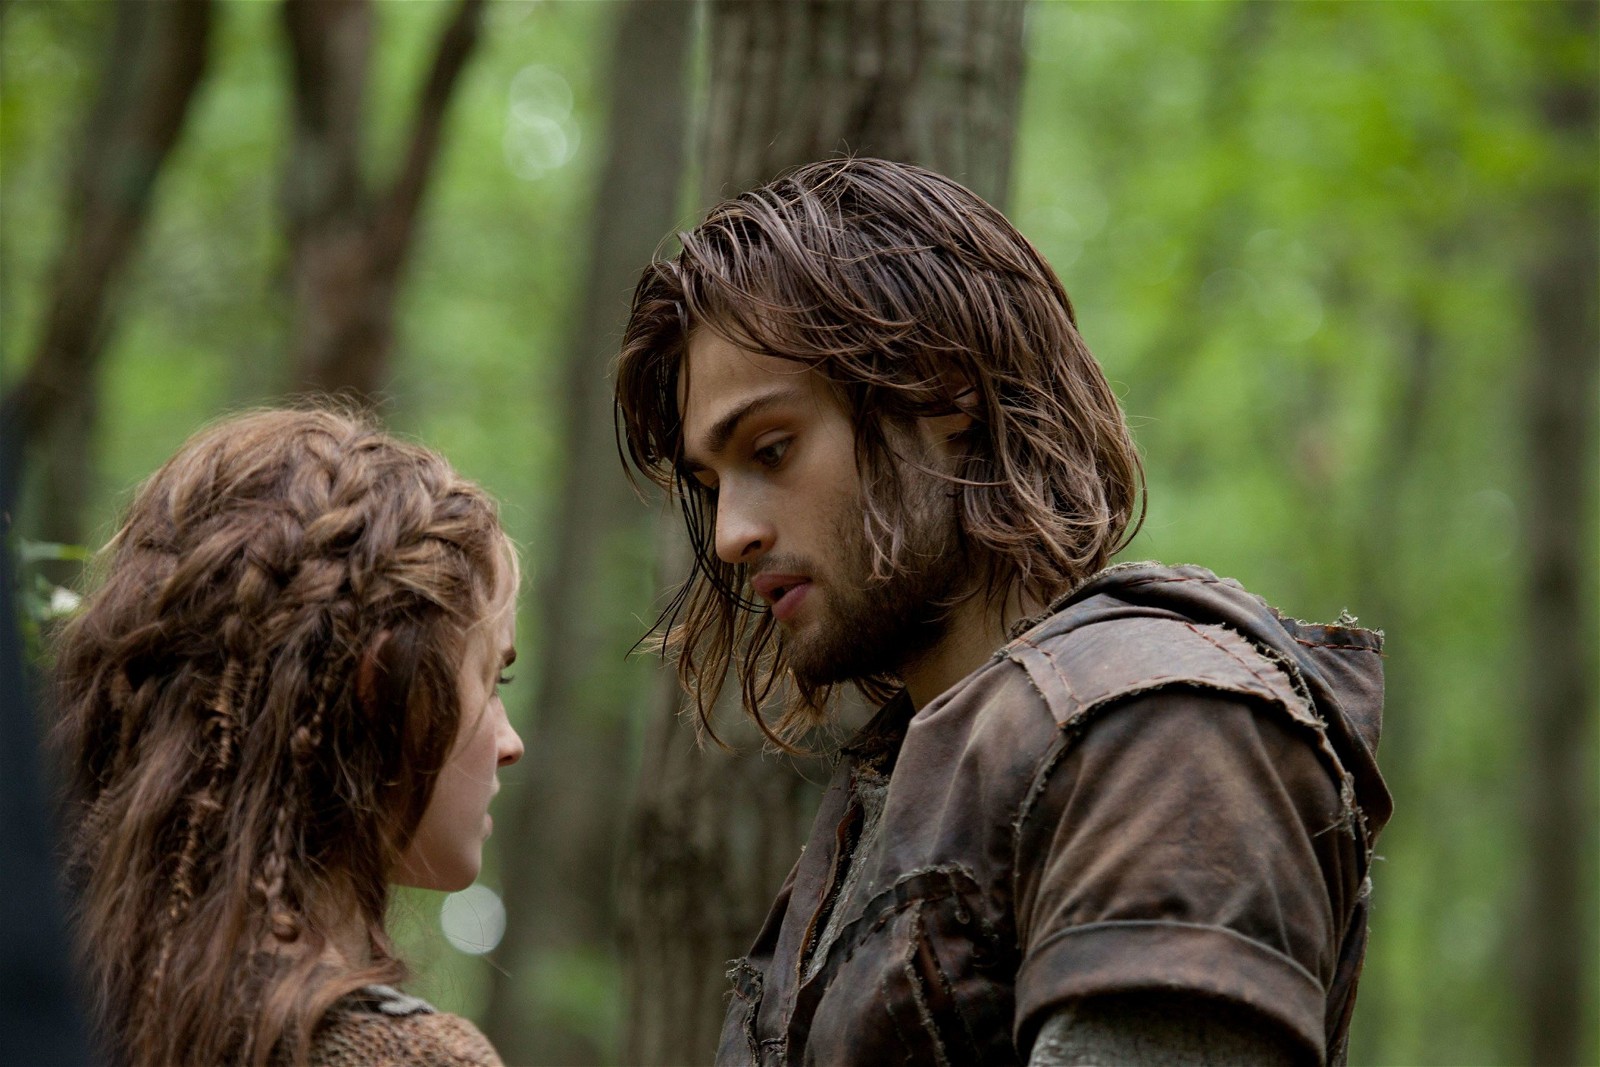 Emma Watson and Douglas Booth in the film Noah